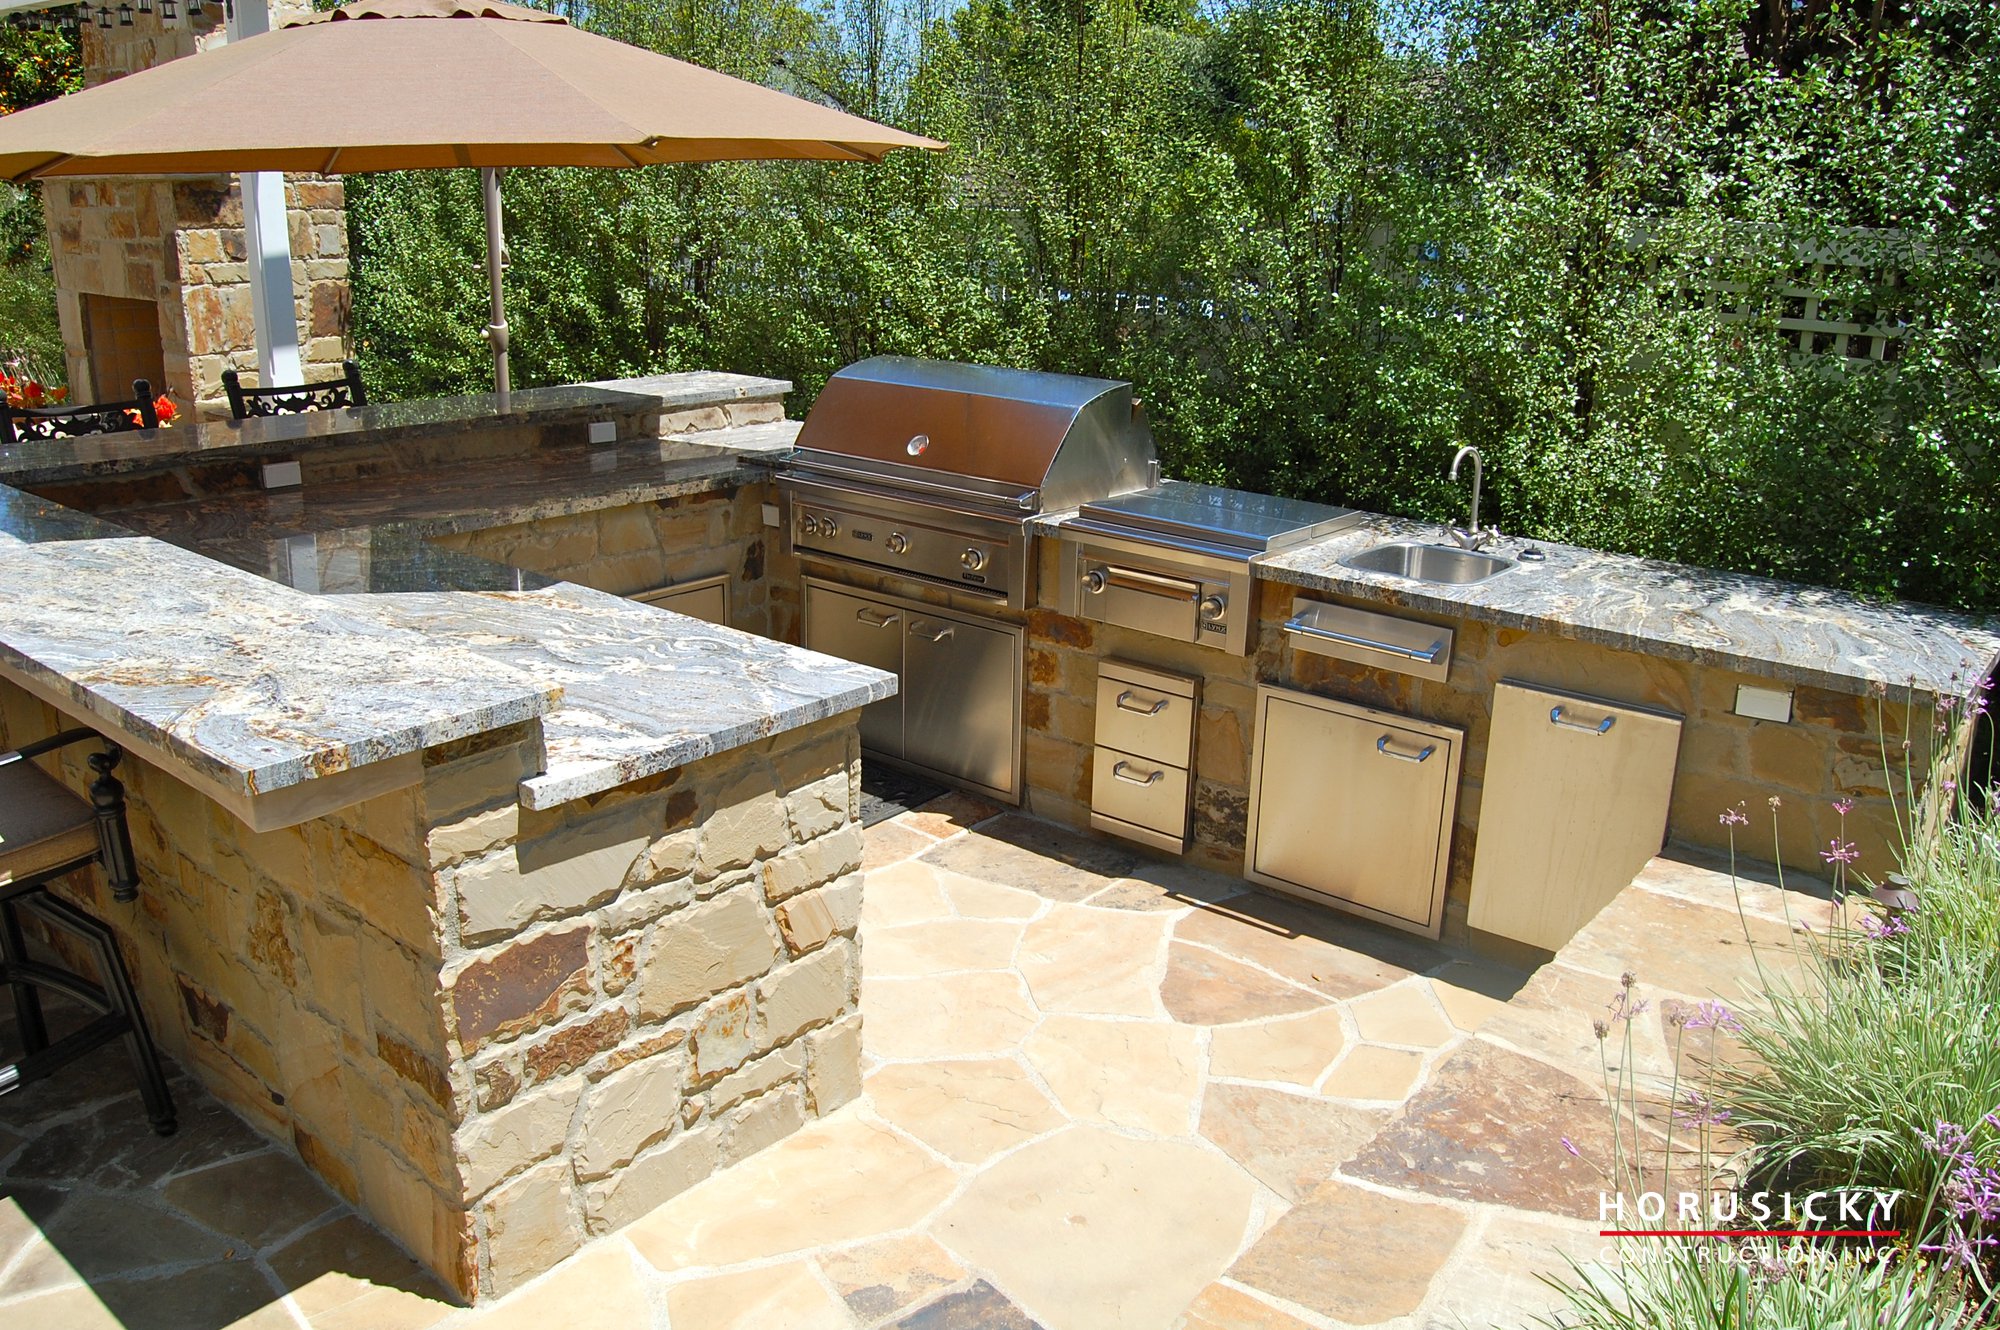 Outdoor Kitchens And Bbq Grills Horusicky Construction